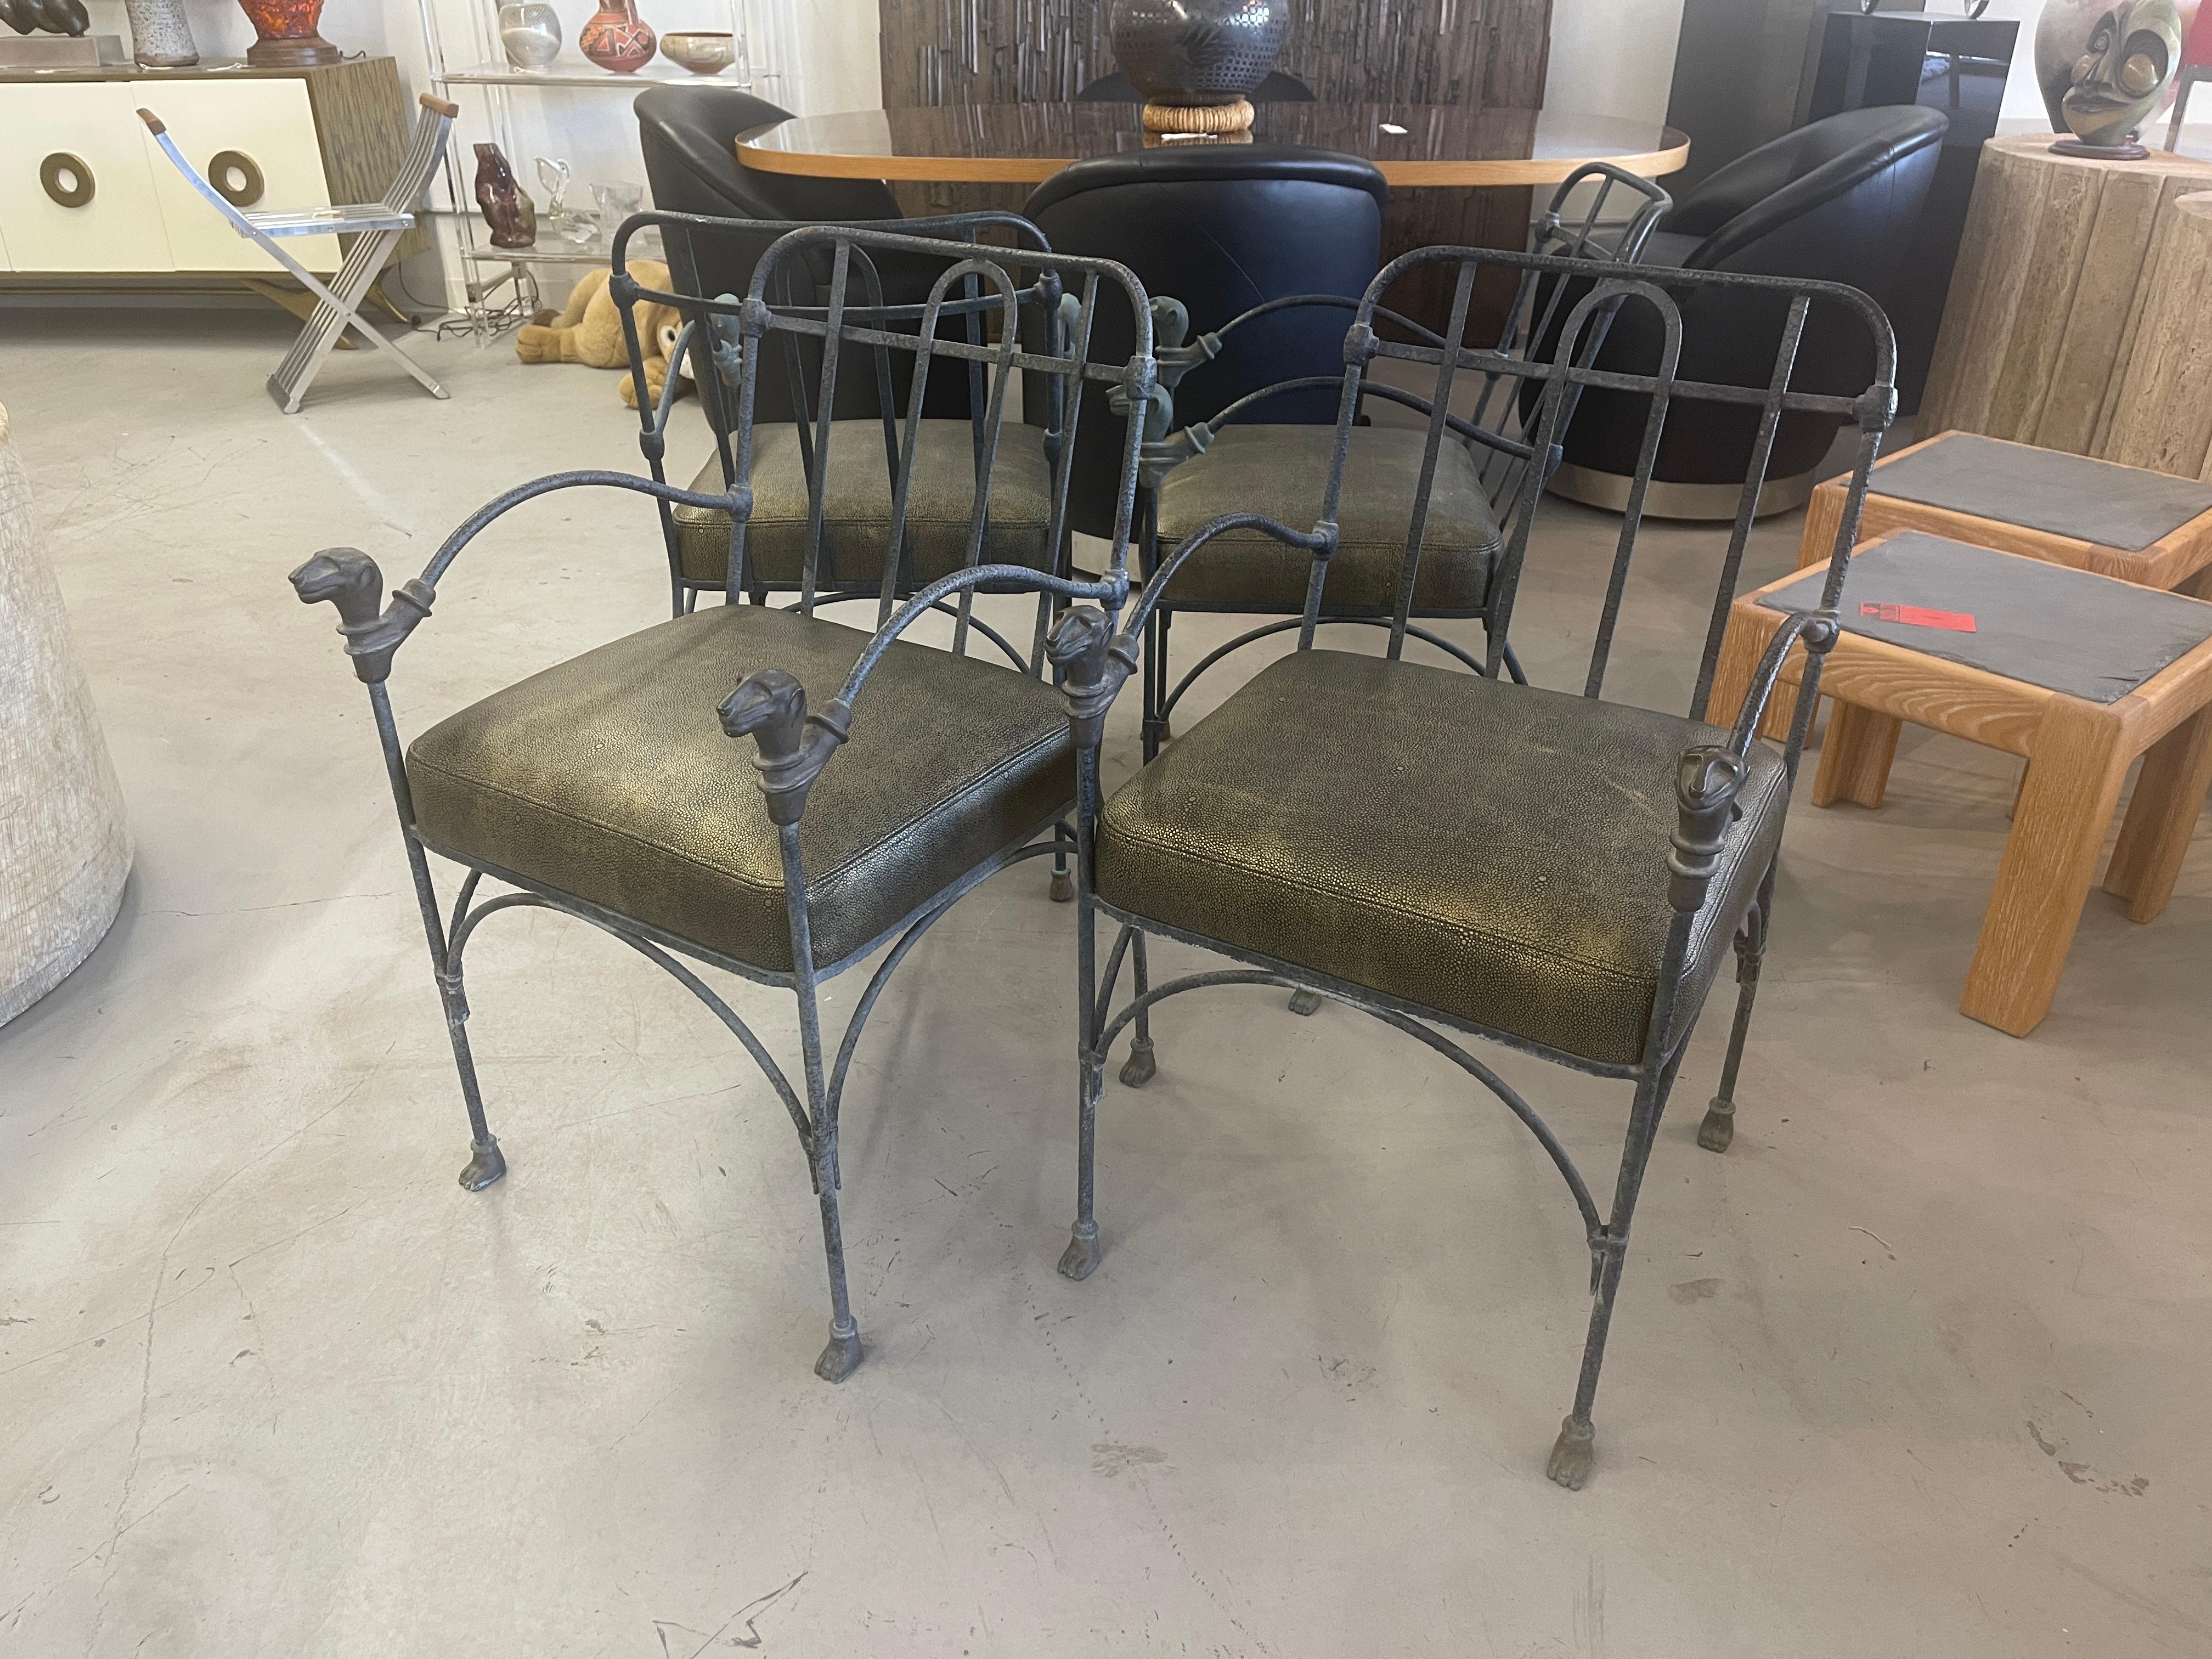 Wonderful set of 4 chairs by J Art Iron works in the style of Giacometti. These vintage chairs have bronze lion head and paw feet details and are made of iron. Each bear the J Art tag. We have had new seats made and upholstered them in Edelman